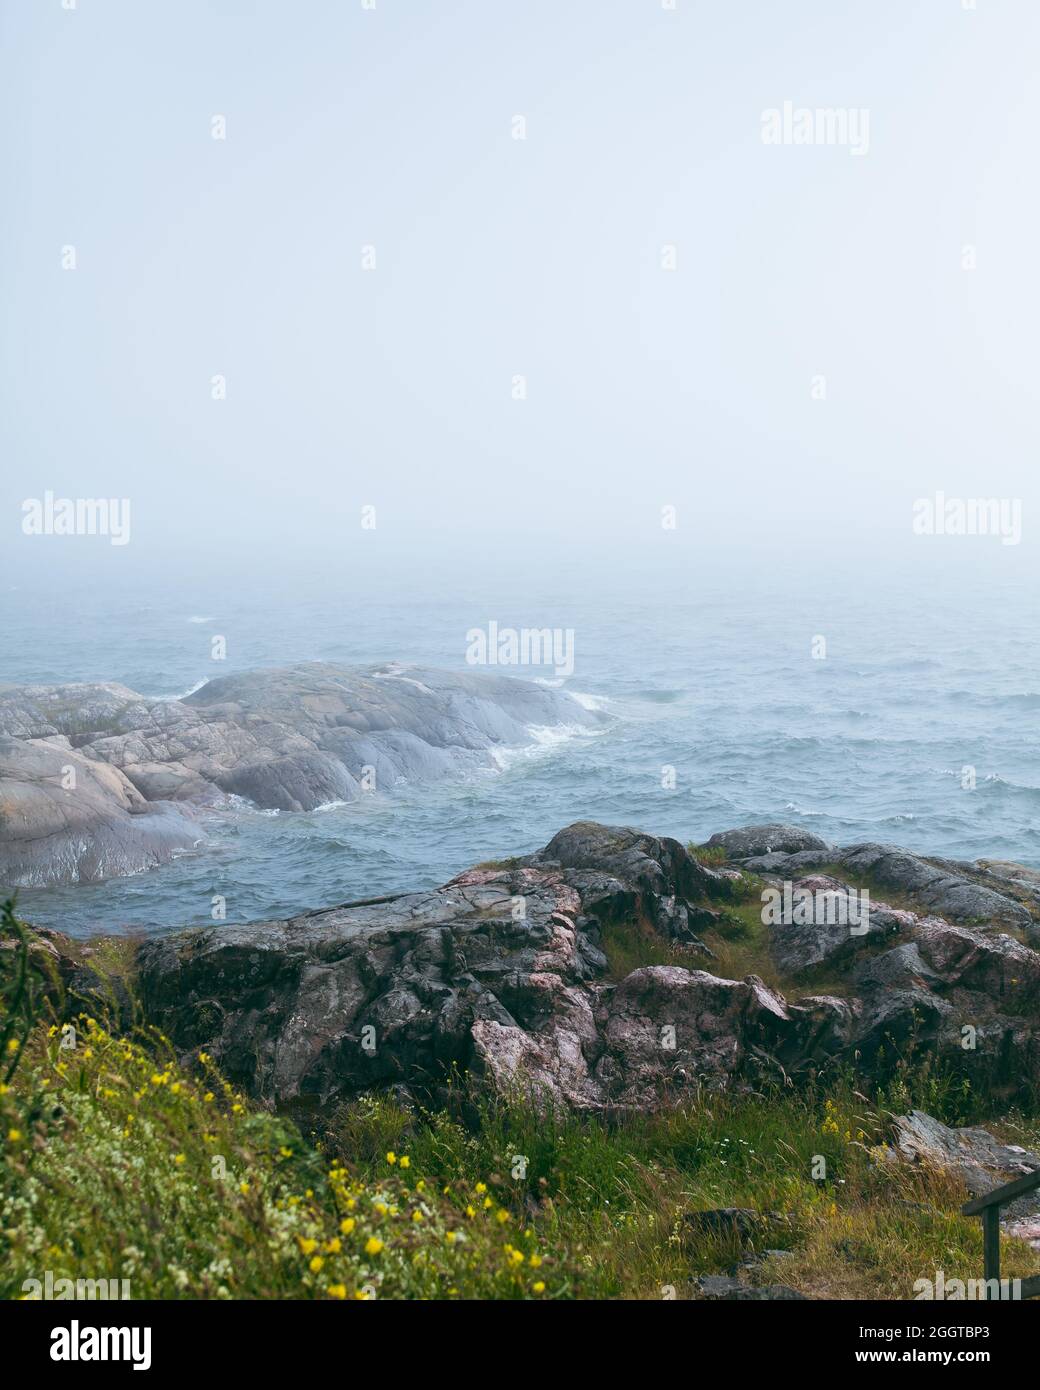 Northern landscape - foggy sea and waves on the rocks. Up on a cliff. Yellow flowers in the front. Stock Photo